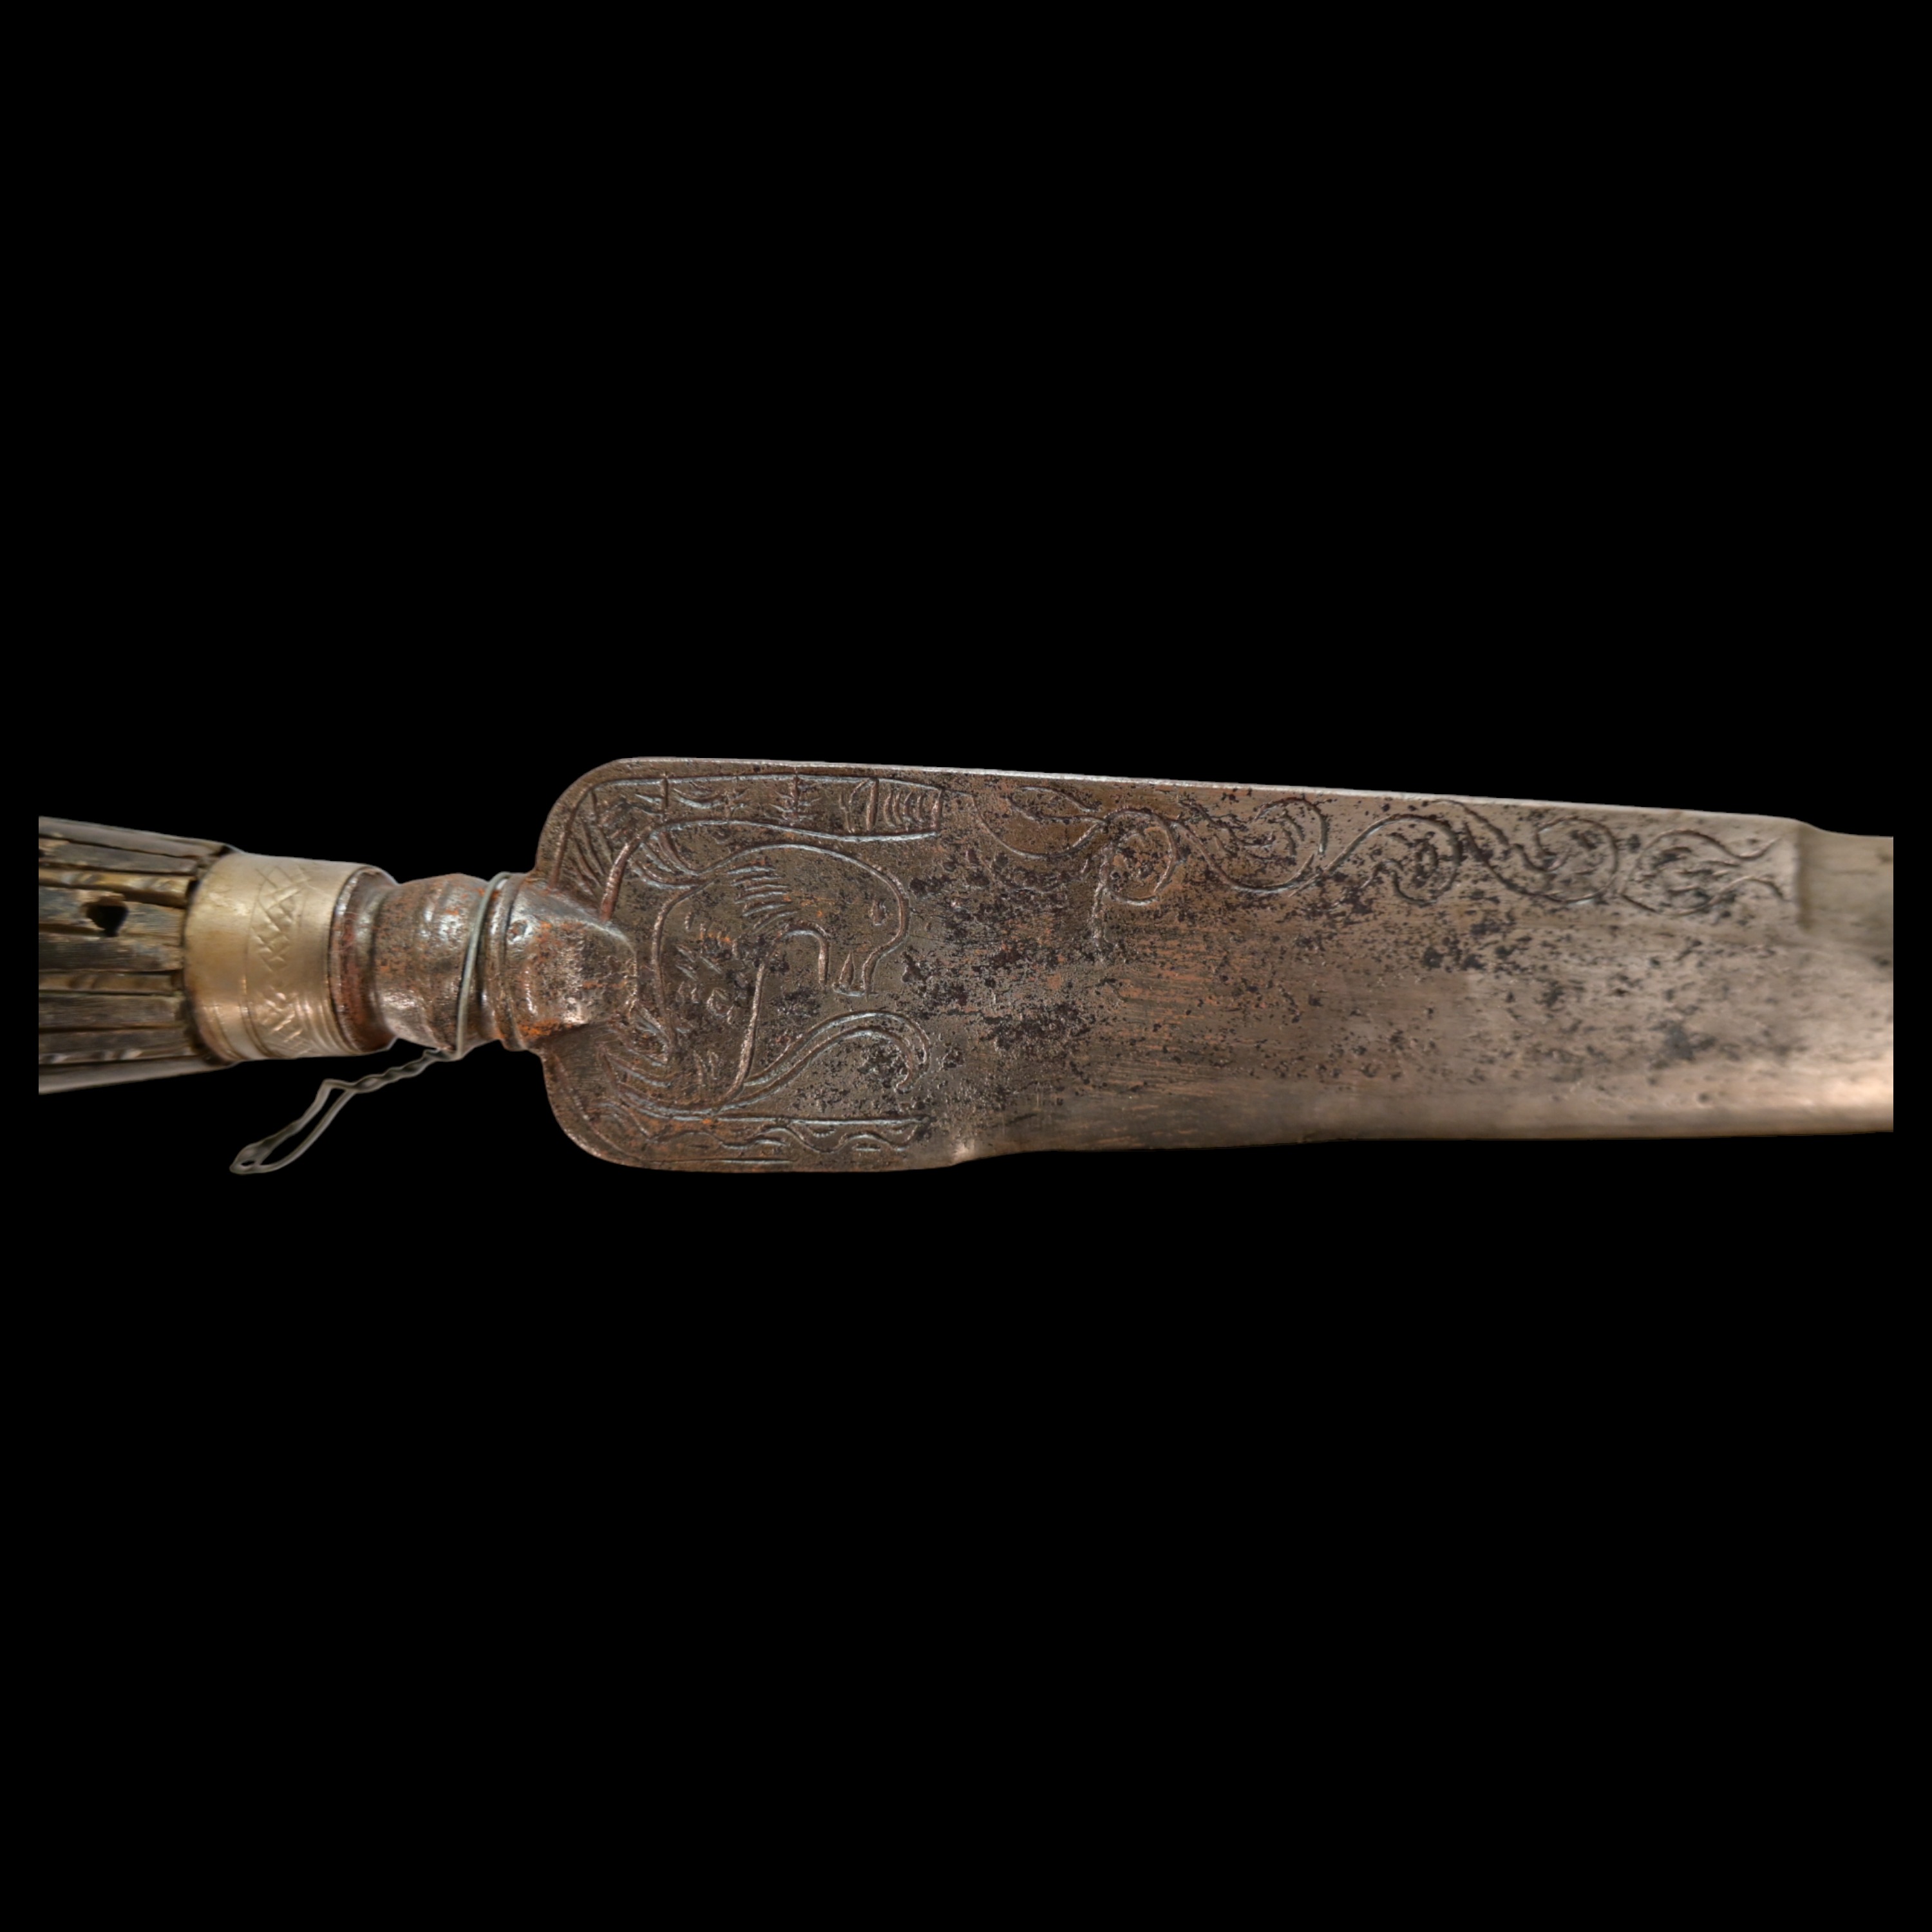 A Italian hunting knife, late 18th C., with engraving on the blade, horn handle in a silver mounting - Image 5 of 9